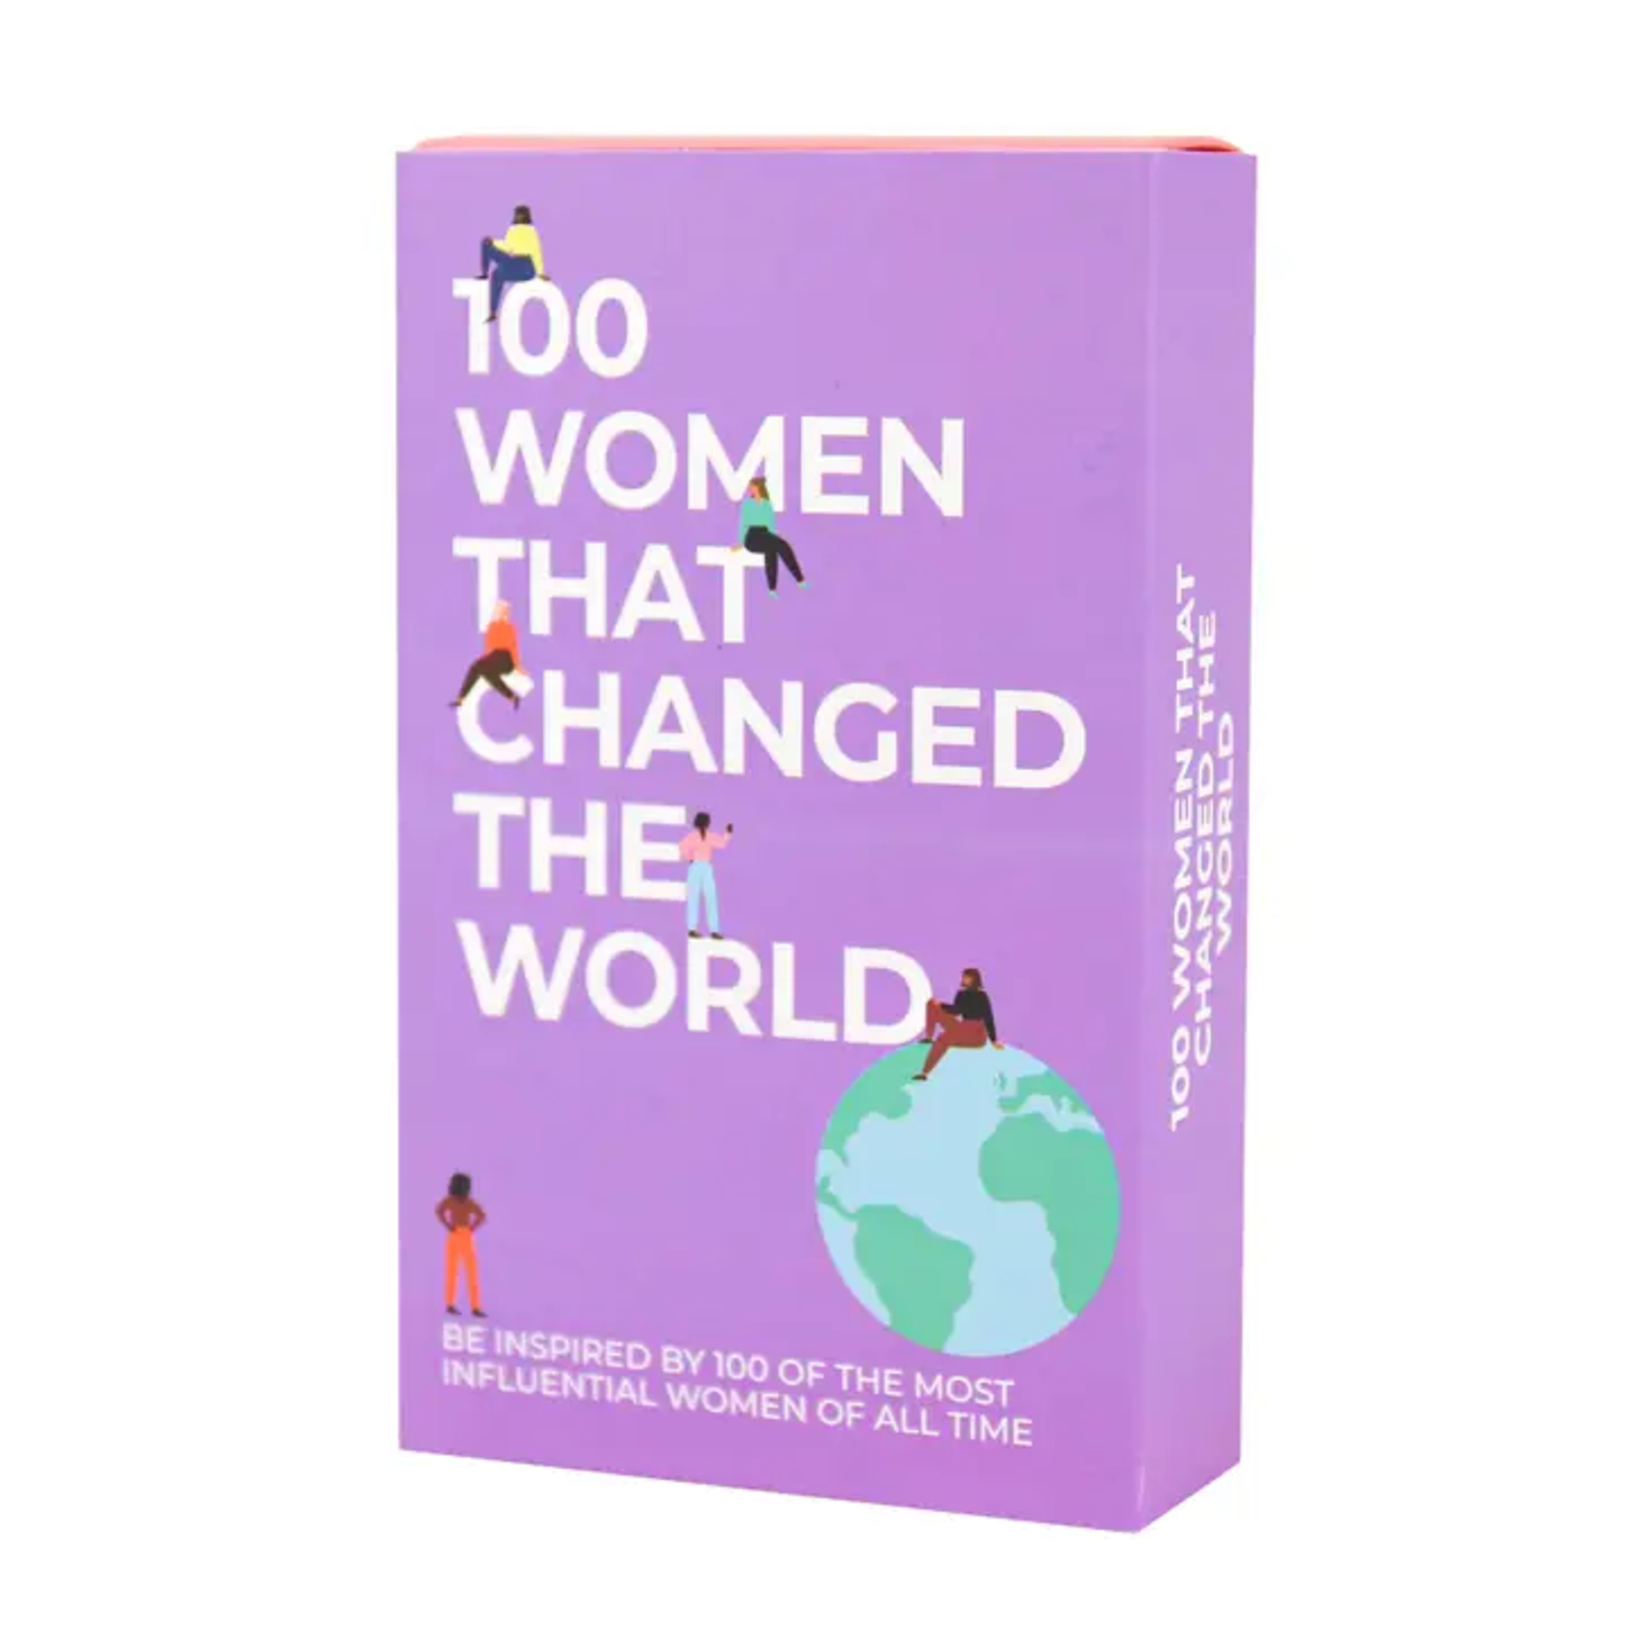 100 Women That Changed the World Cards